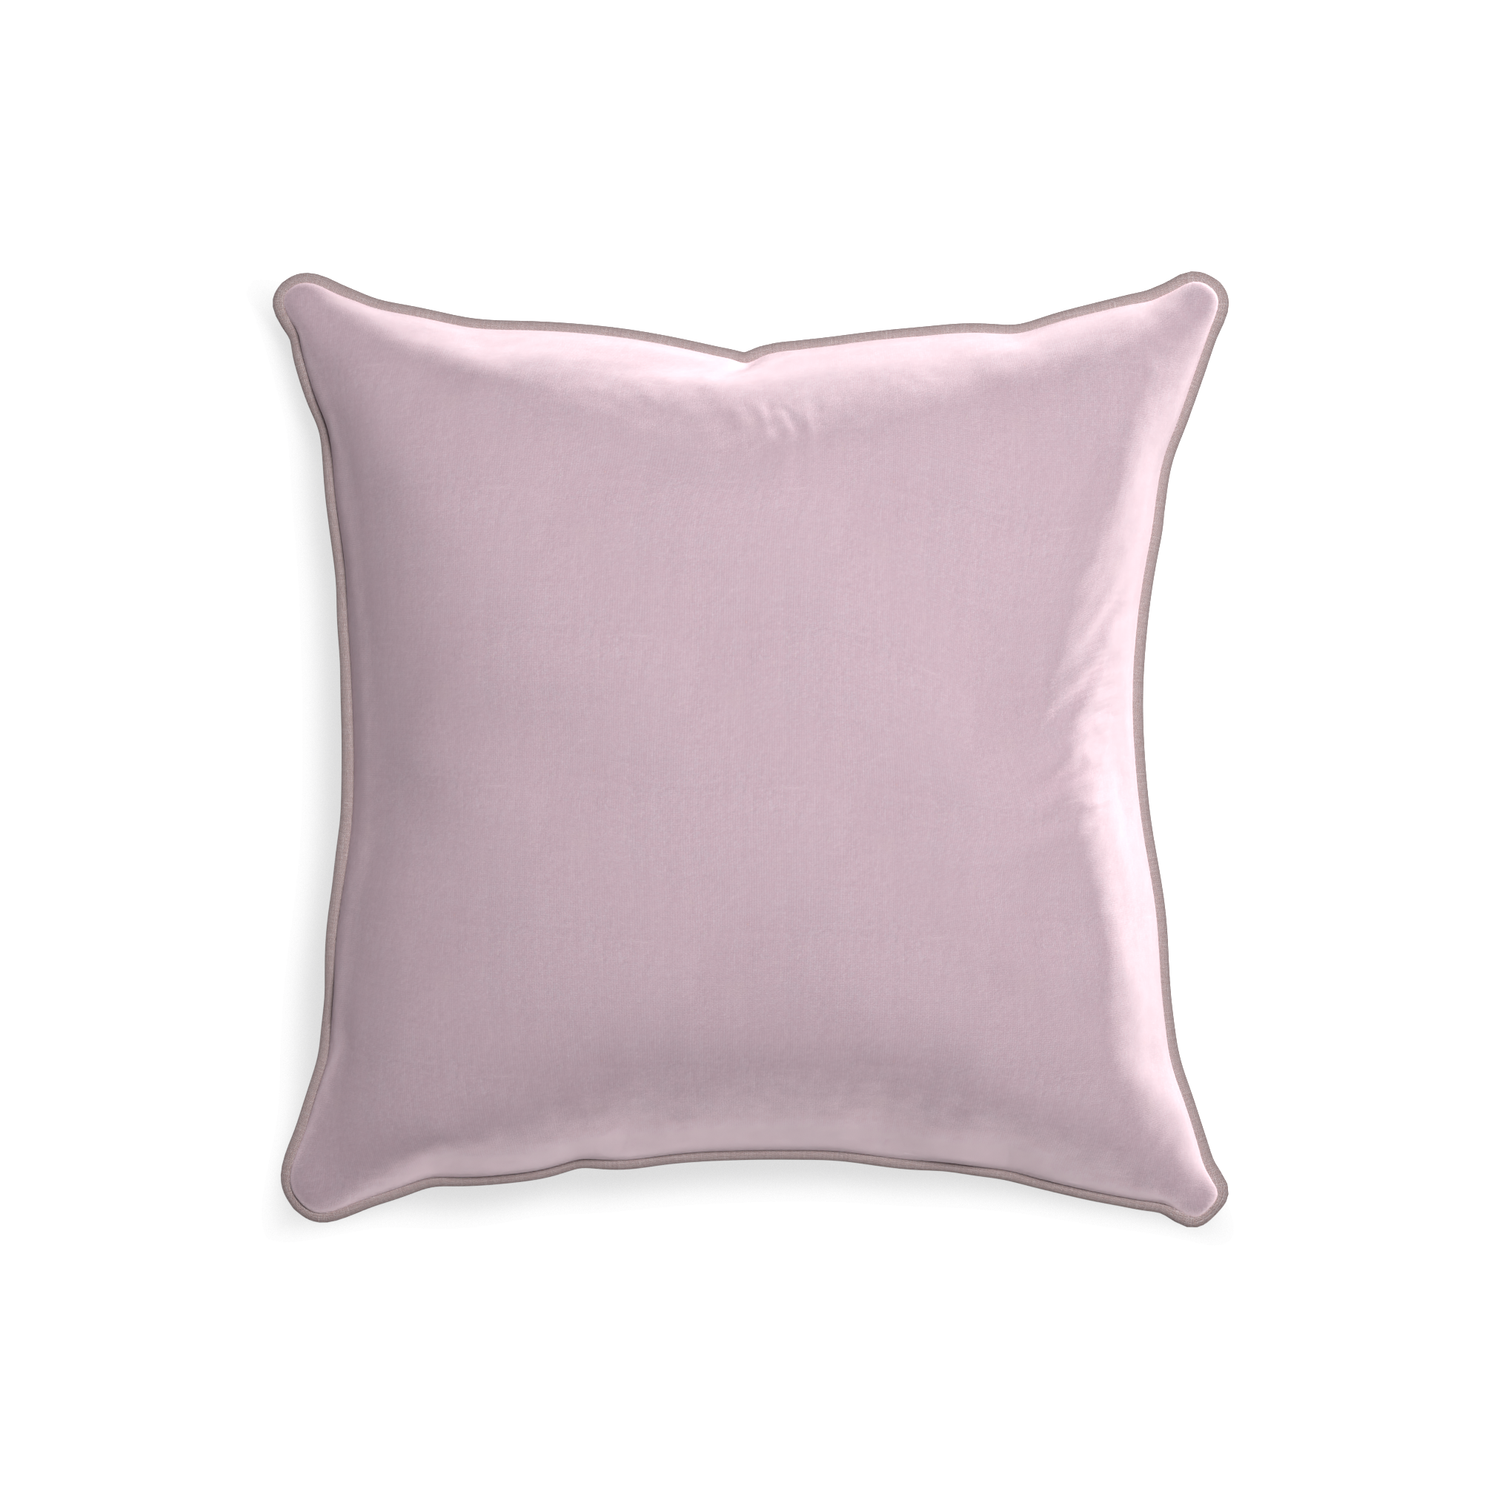 20-square lilac velvet custom lilacpillow with orchid piping on white background